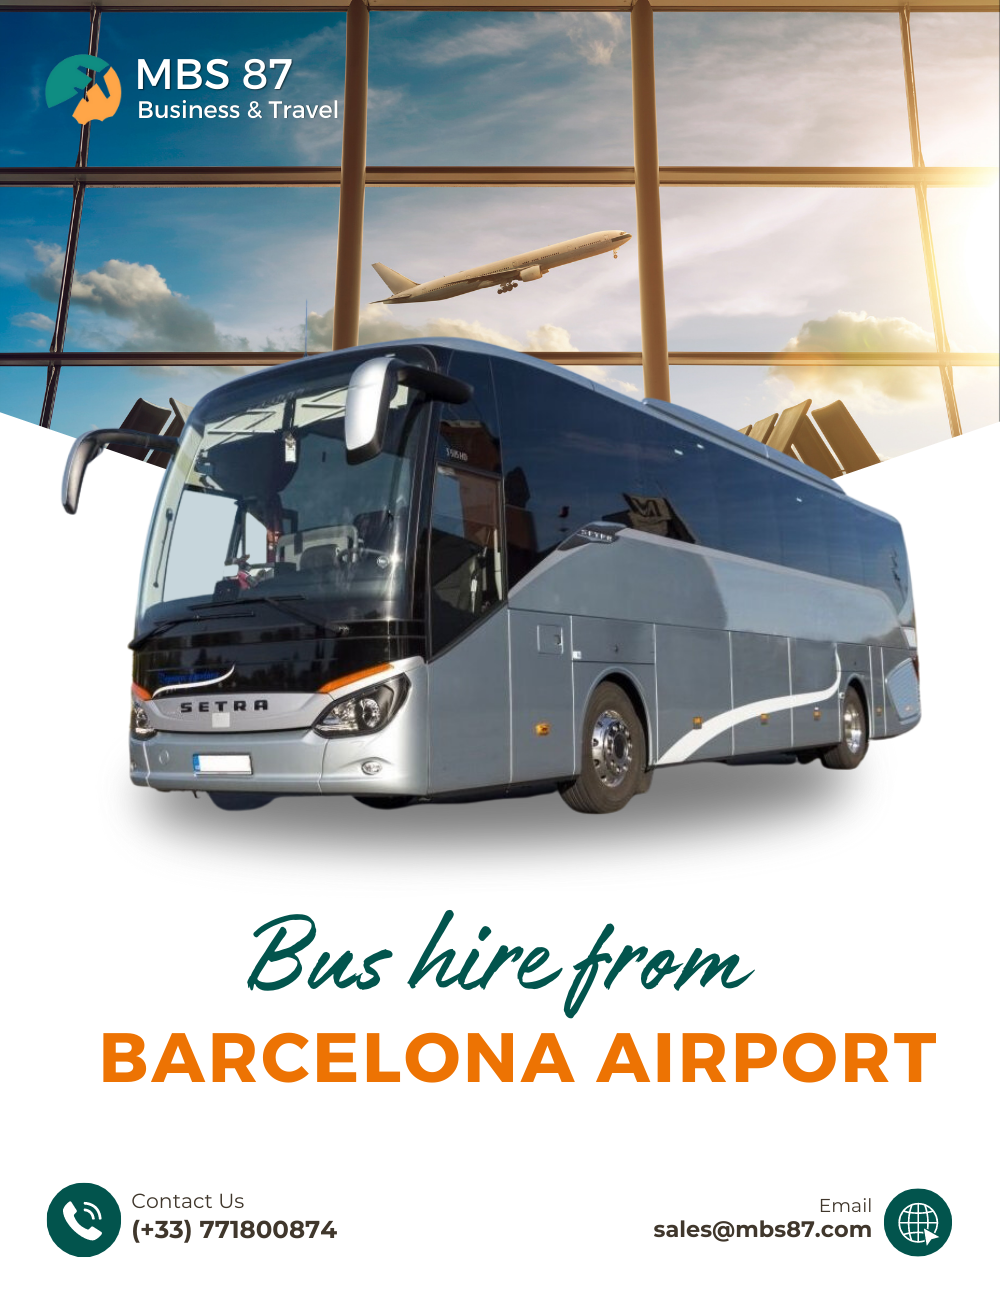 Bus hire from Barcelona airport